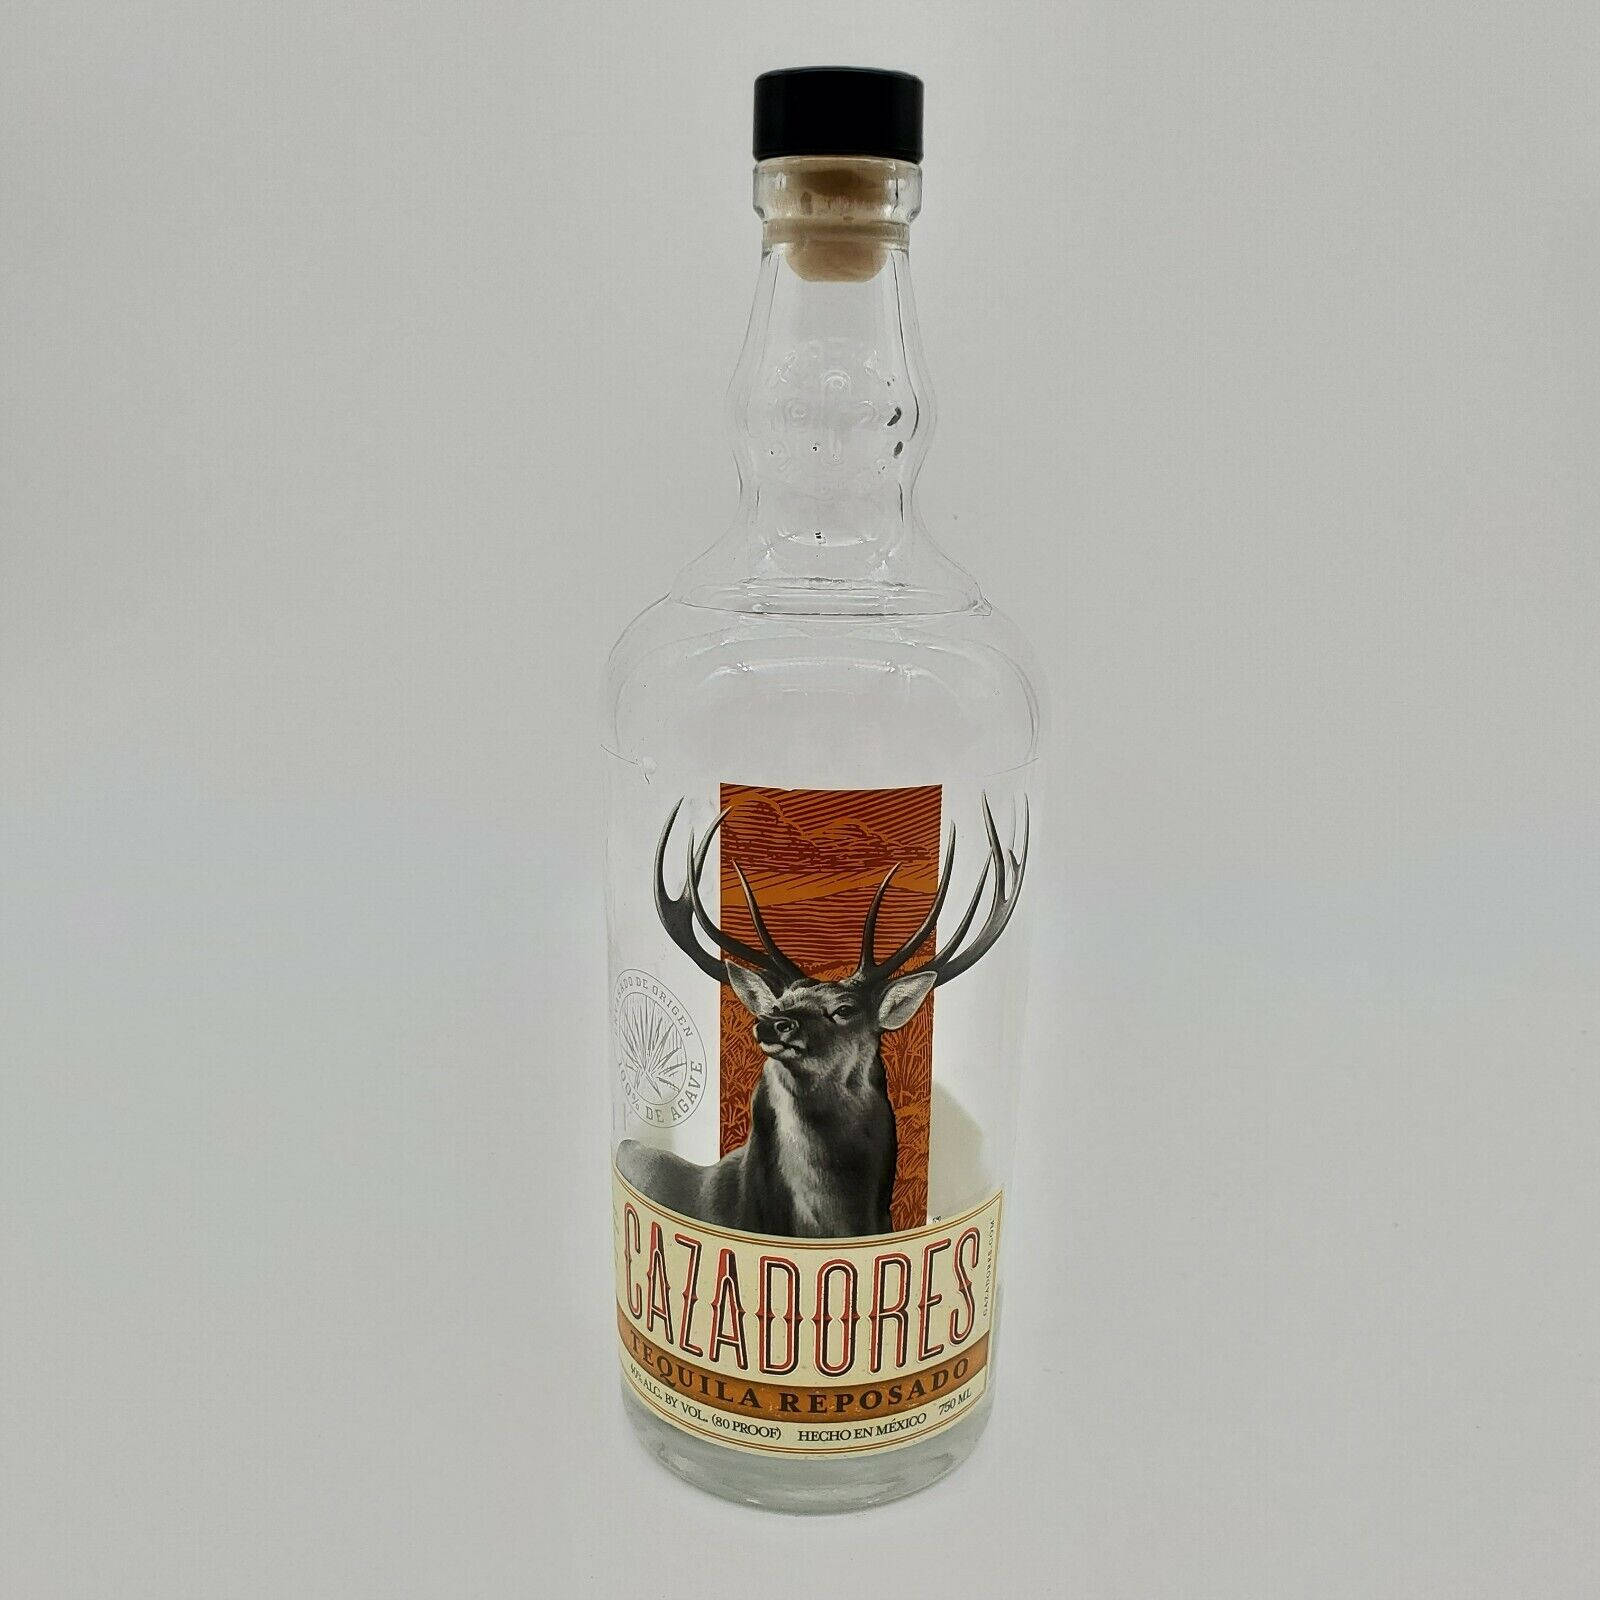 An empty bottle of Cazadores Tequila Reposado depicts the refined taste and history of Mexican beverages. Wallpaper